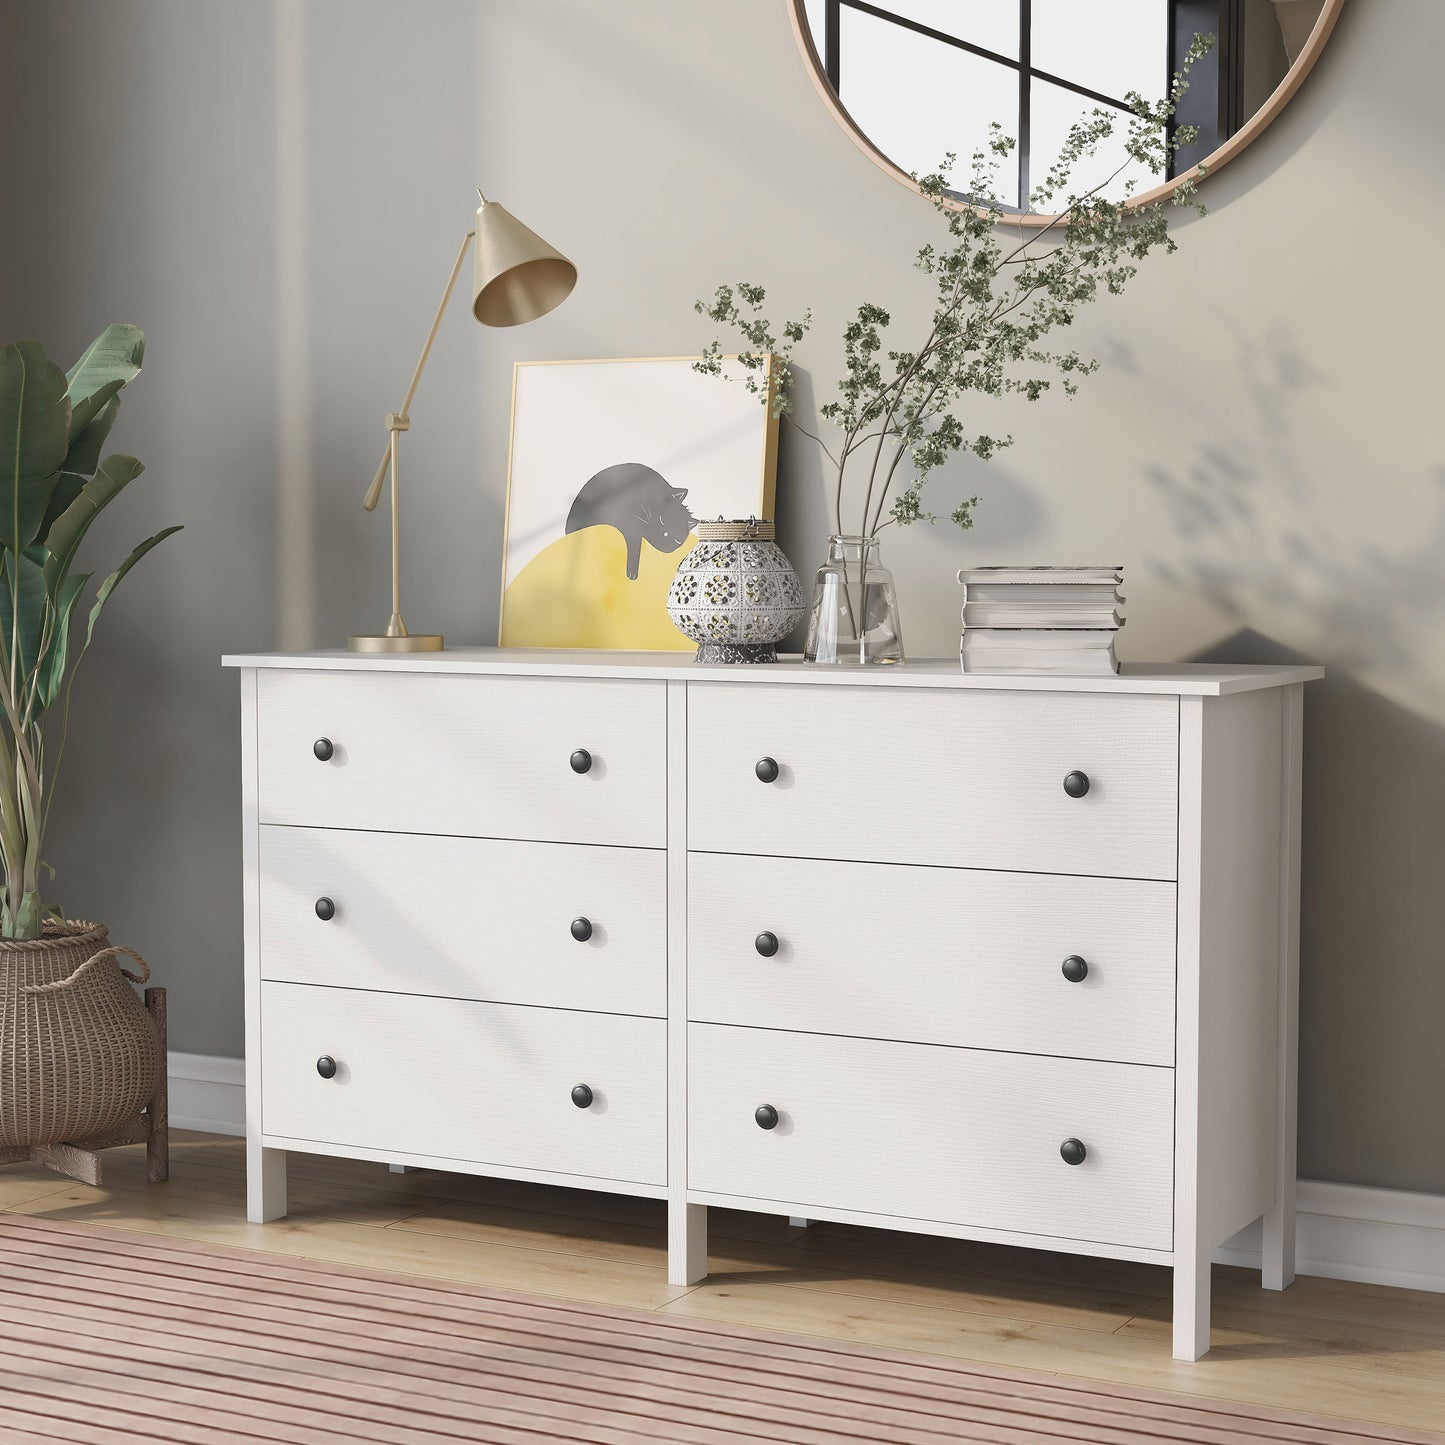 Left angled transitional white six-drawer youth dresser in a bedroom with accessories